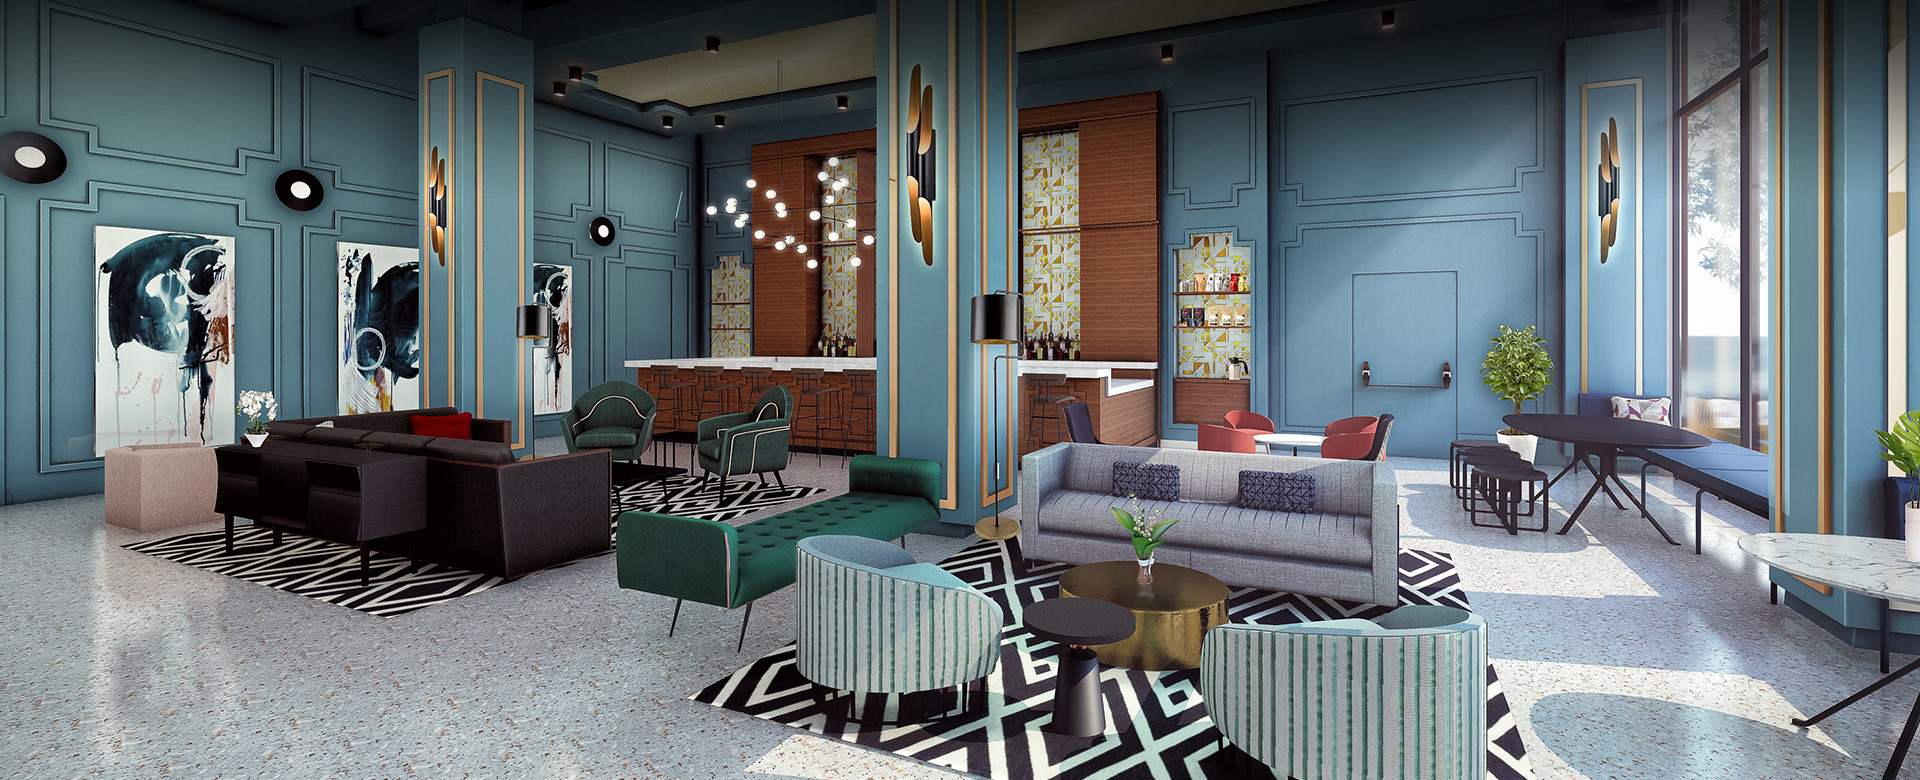 hotel lobby with blue wallpaper and many seating areas all with different chairs